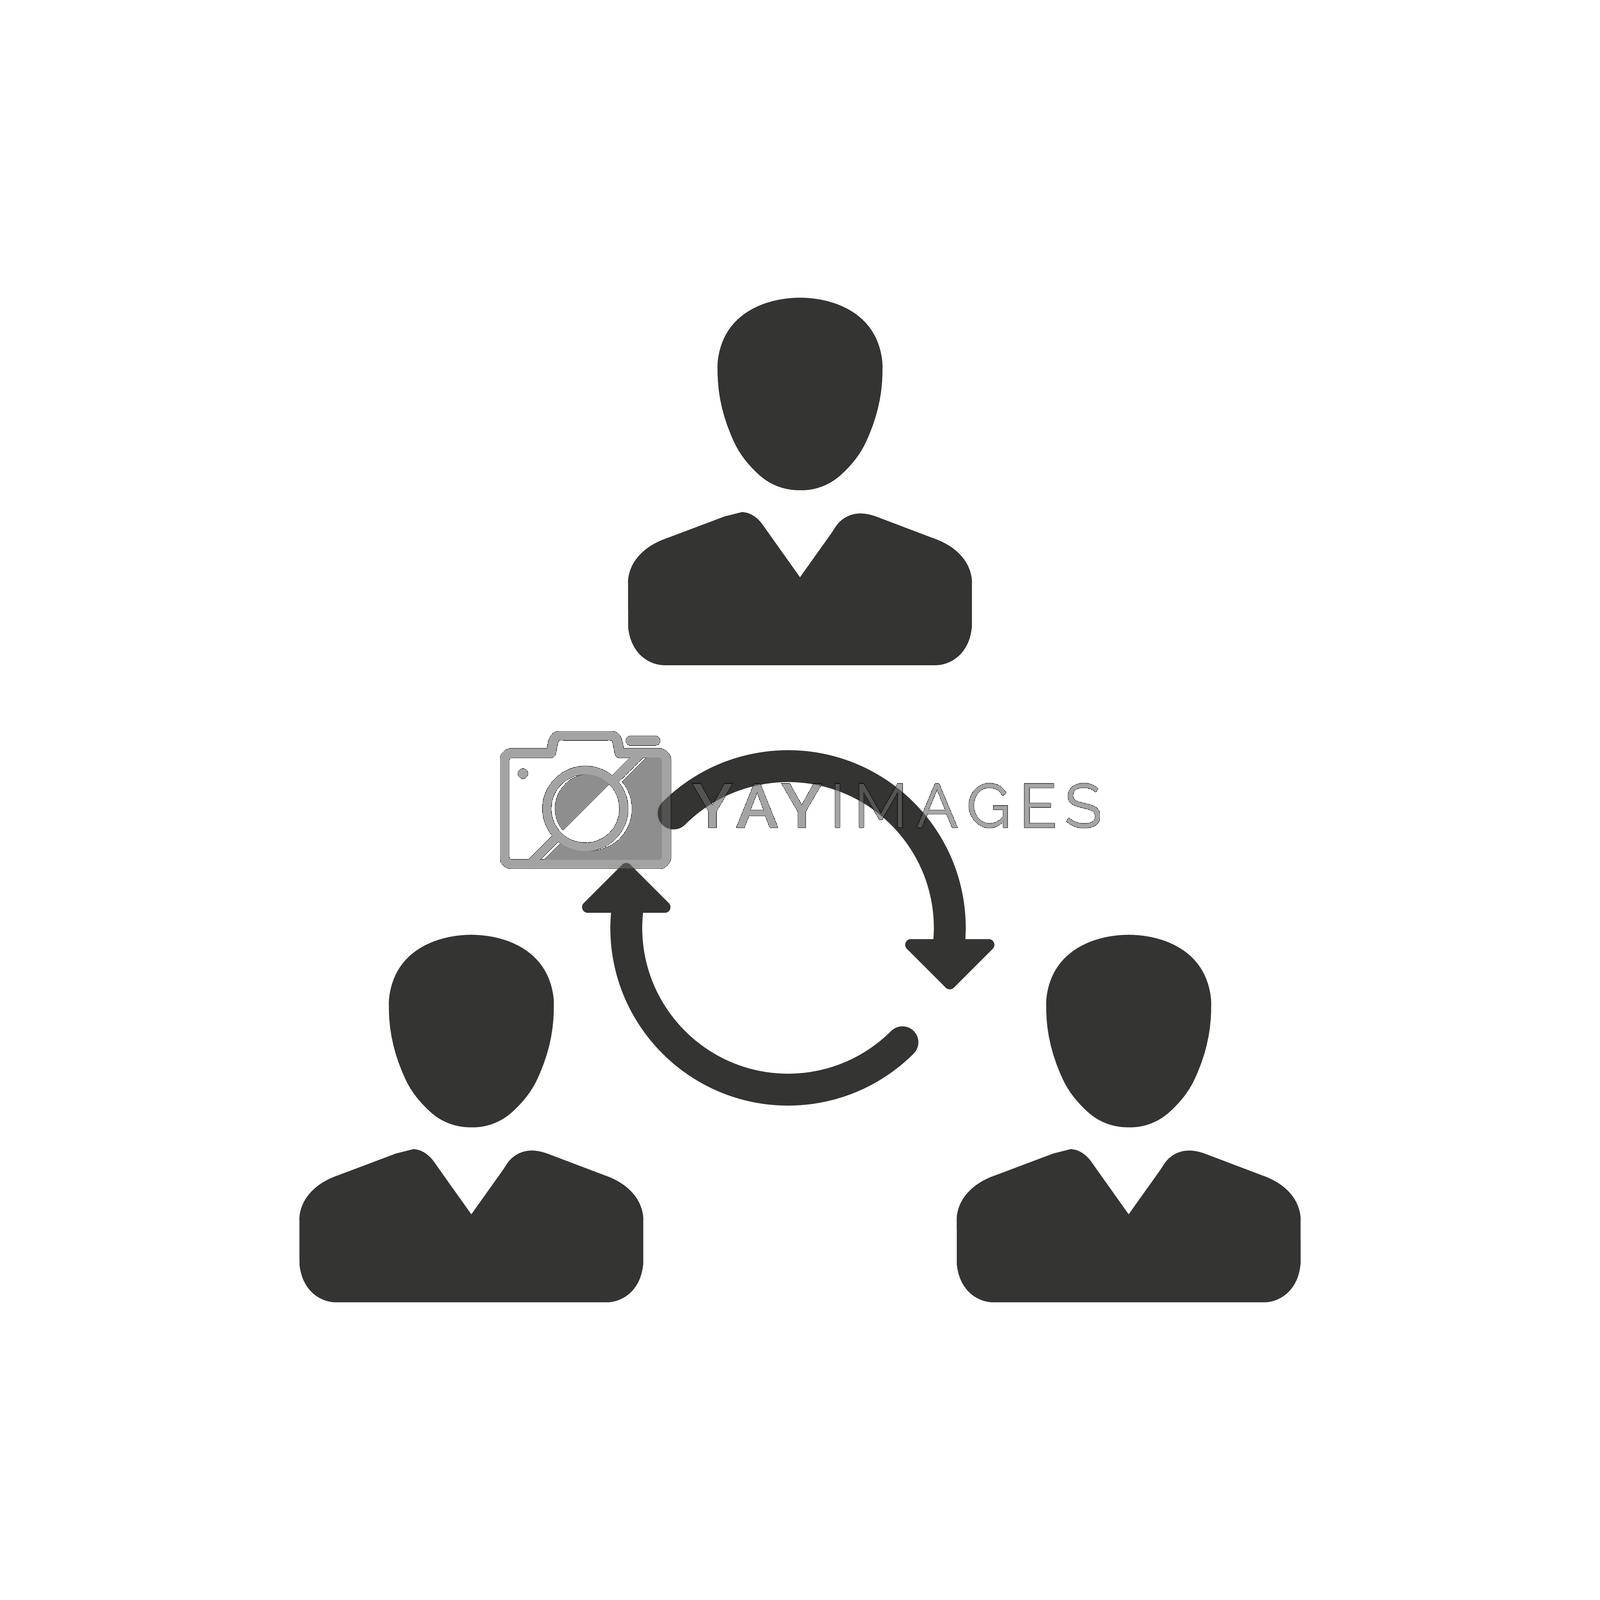 Royalty free image of Teamwork Communication Icon by delwar018